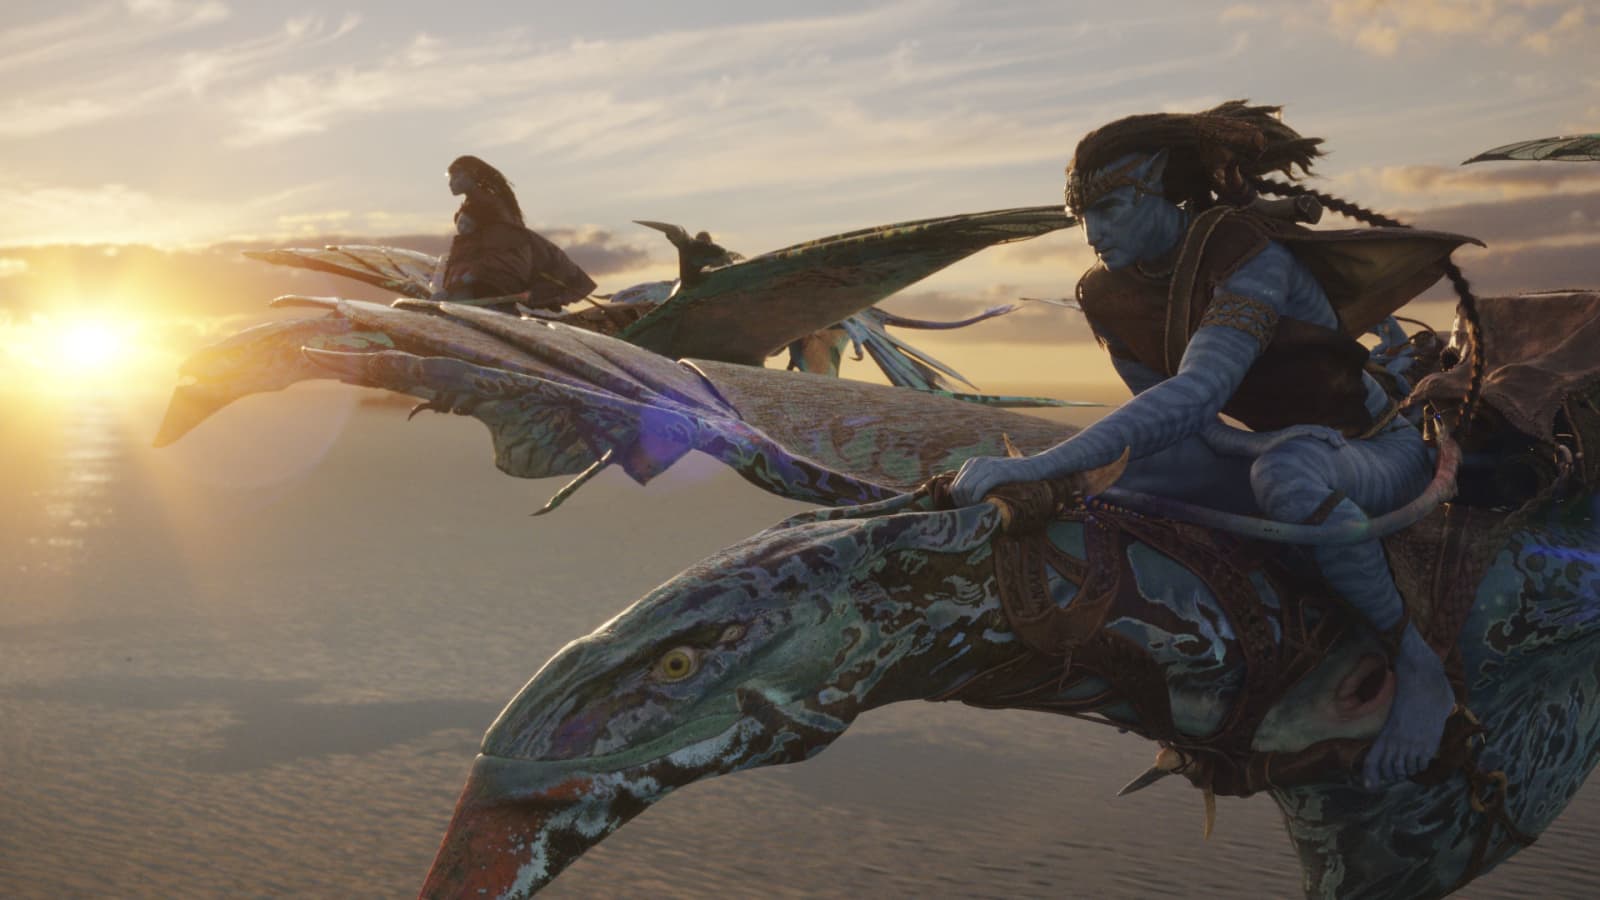 Great Director James Cameron Avatar 2 Movie Review Details